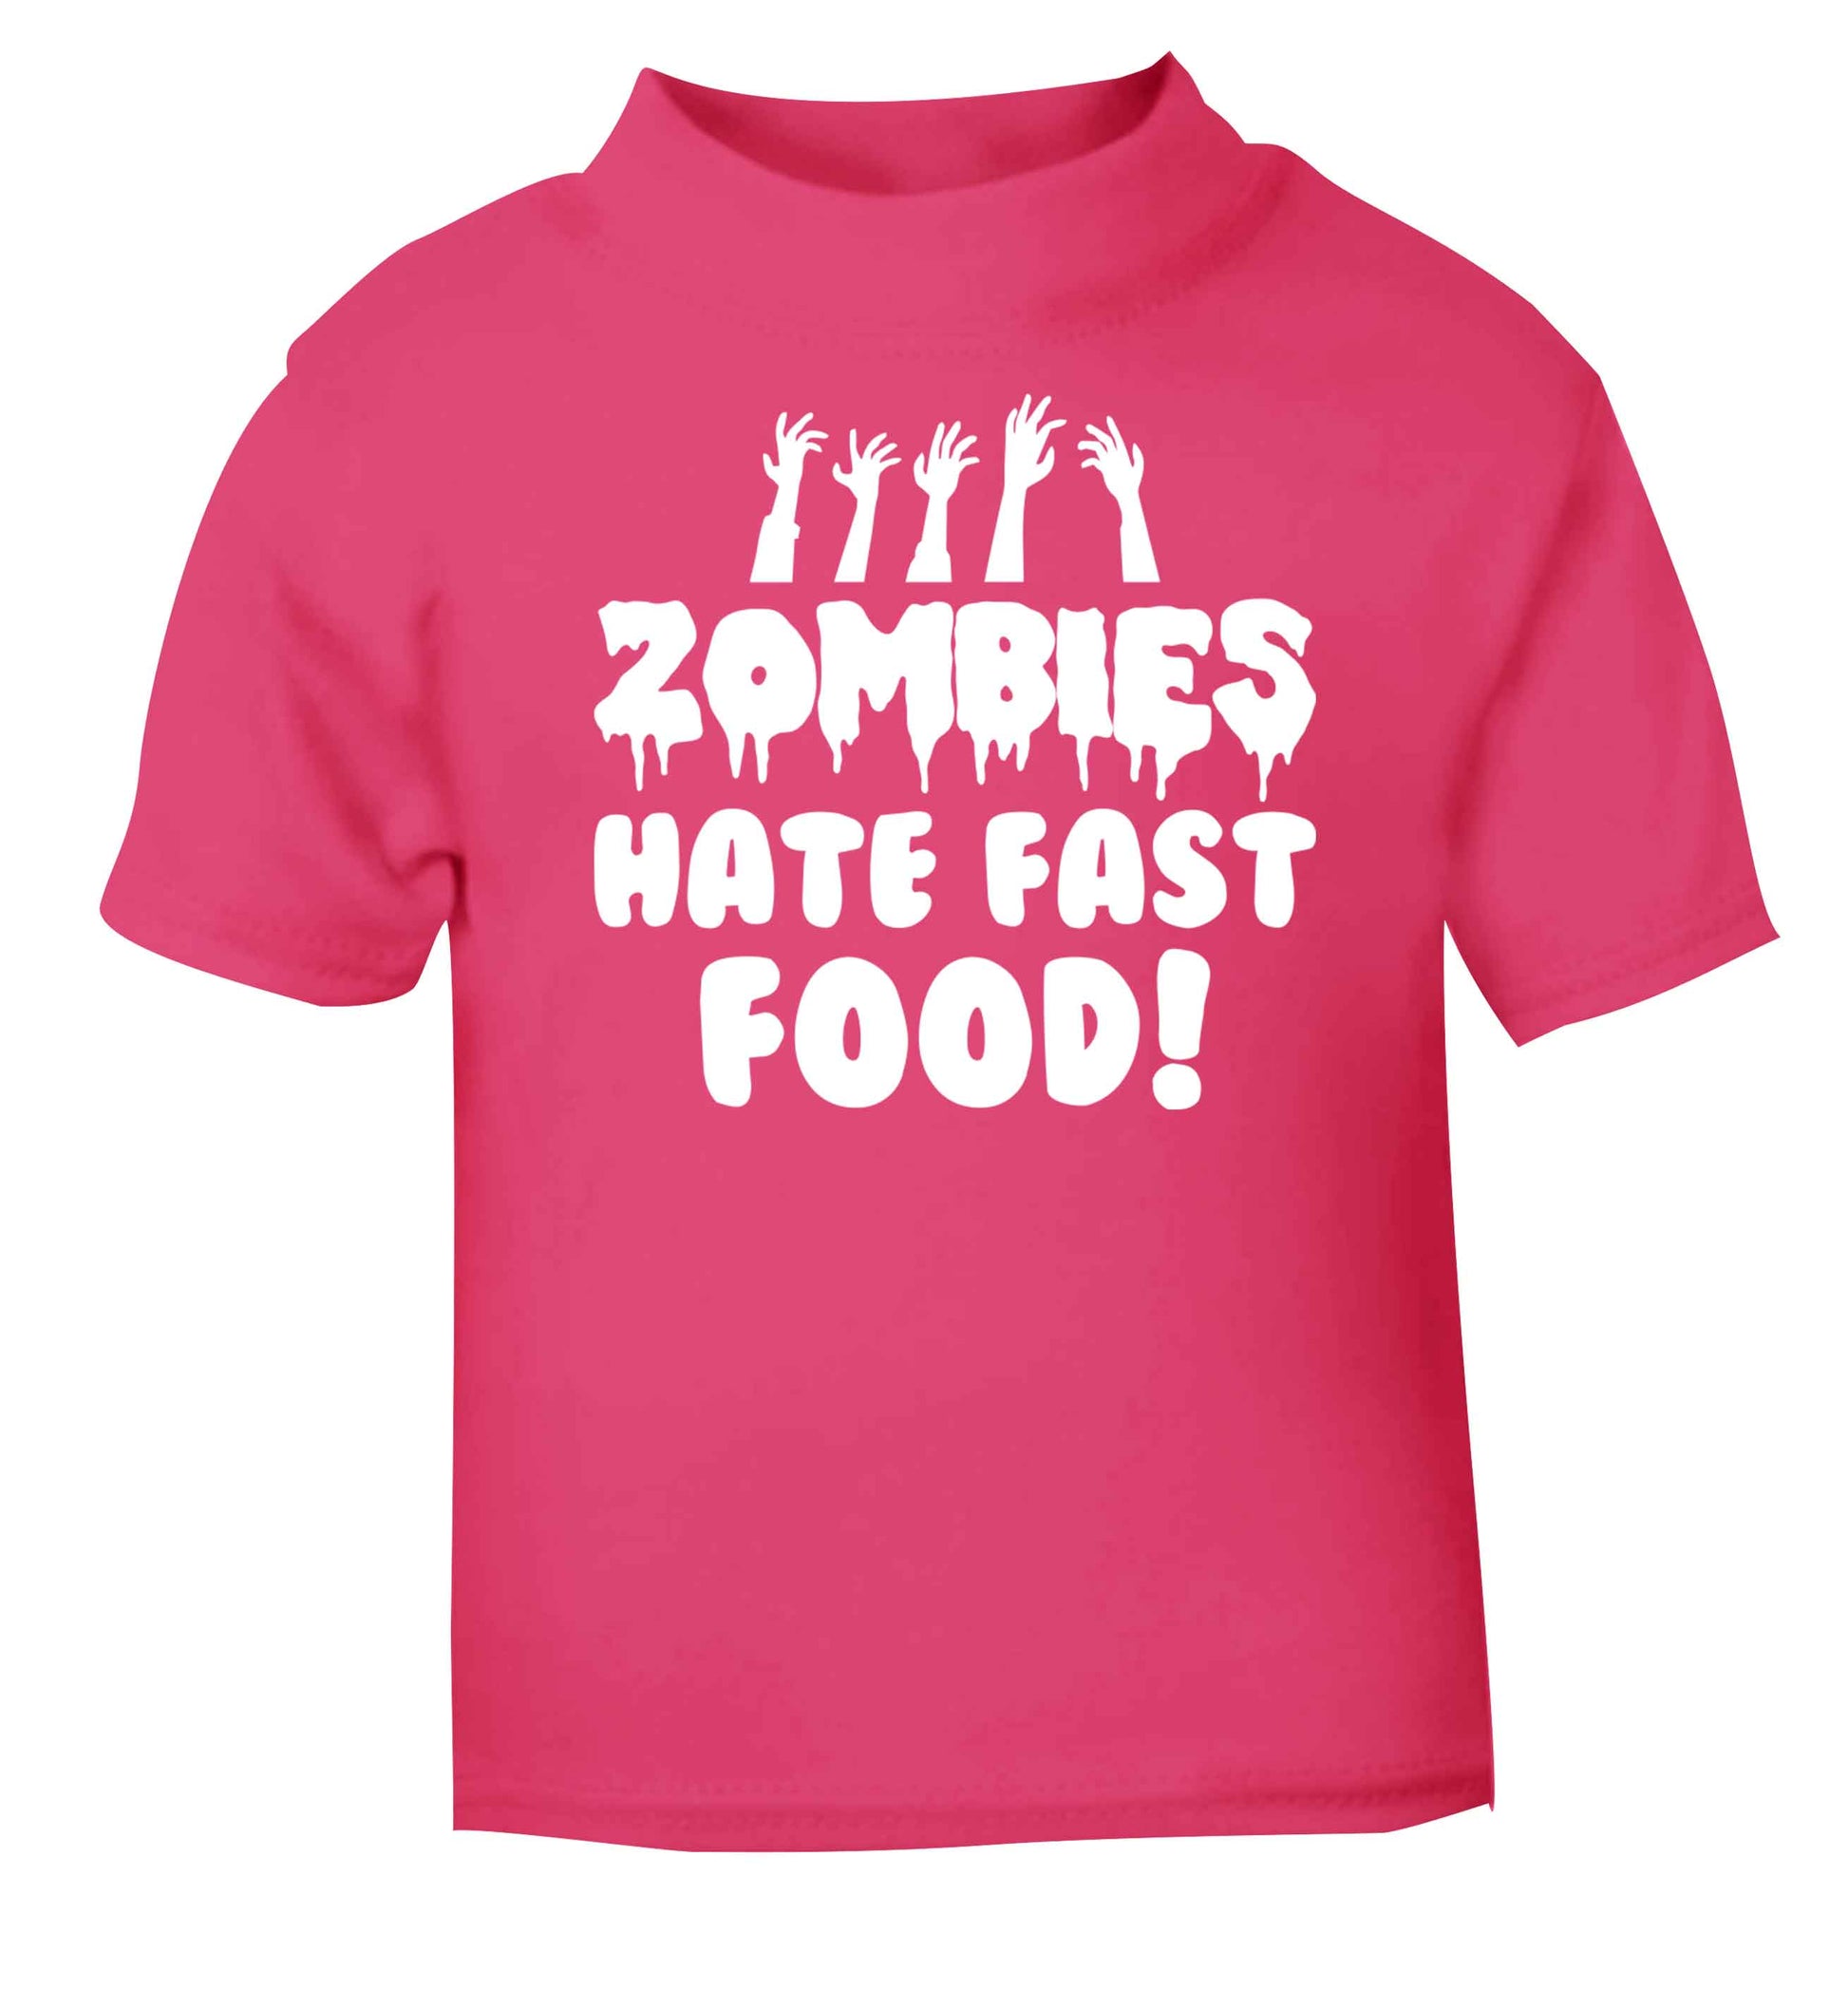 Zombies hate fast food pink baby toddler Tshirt 2 Years